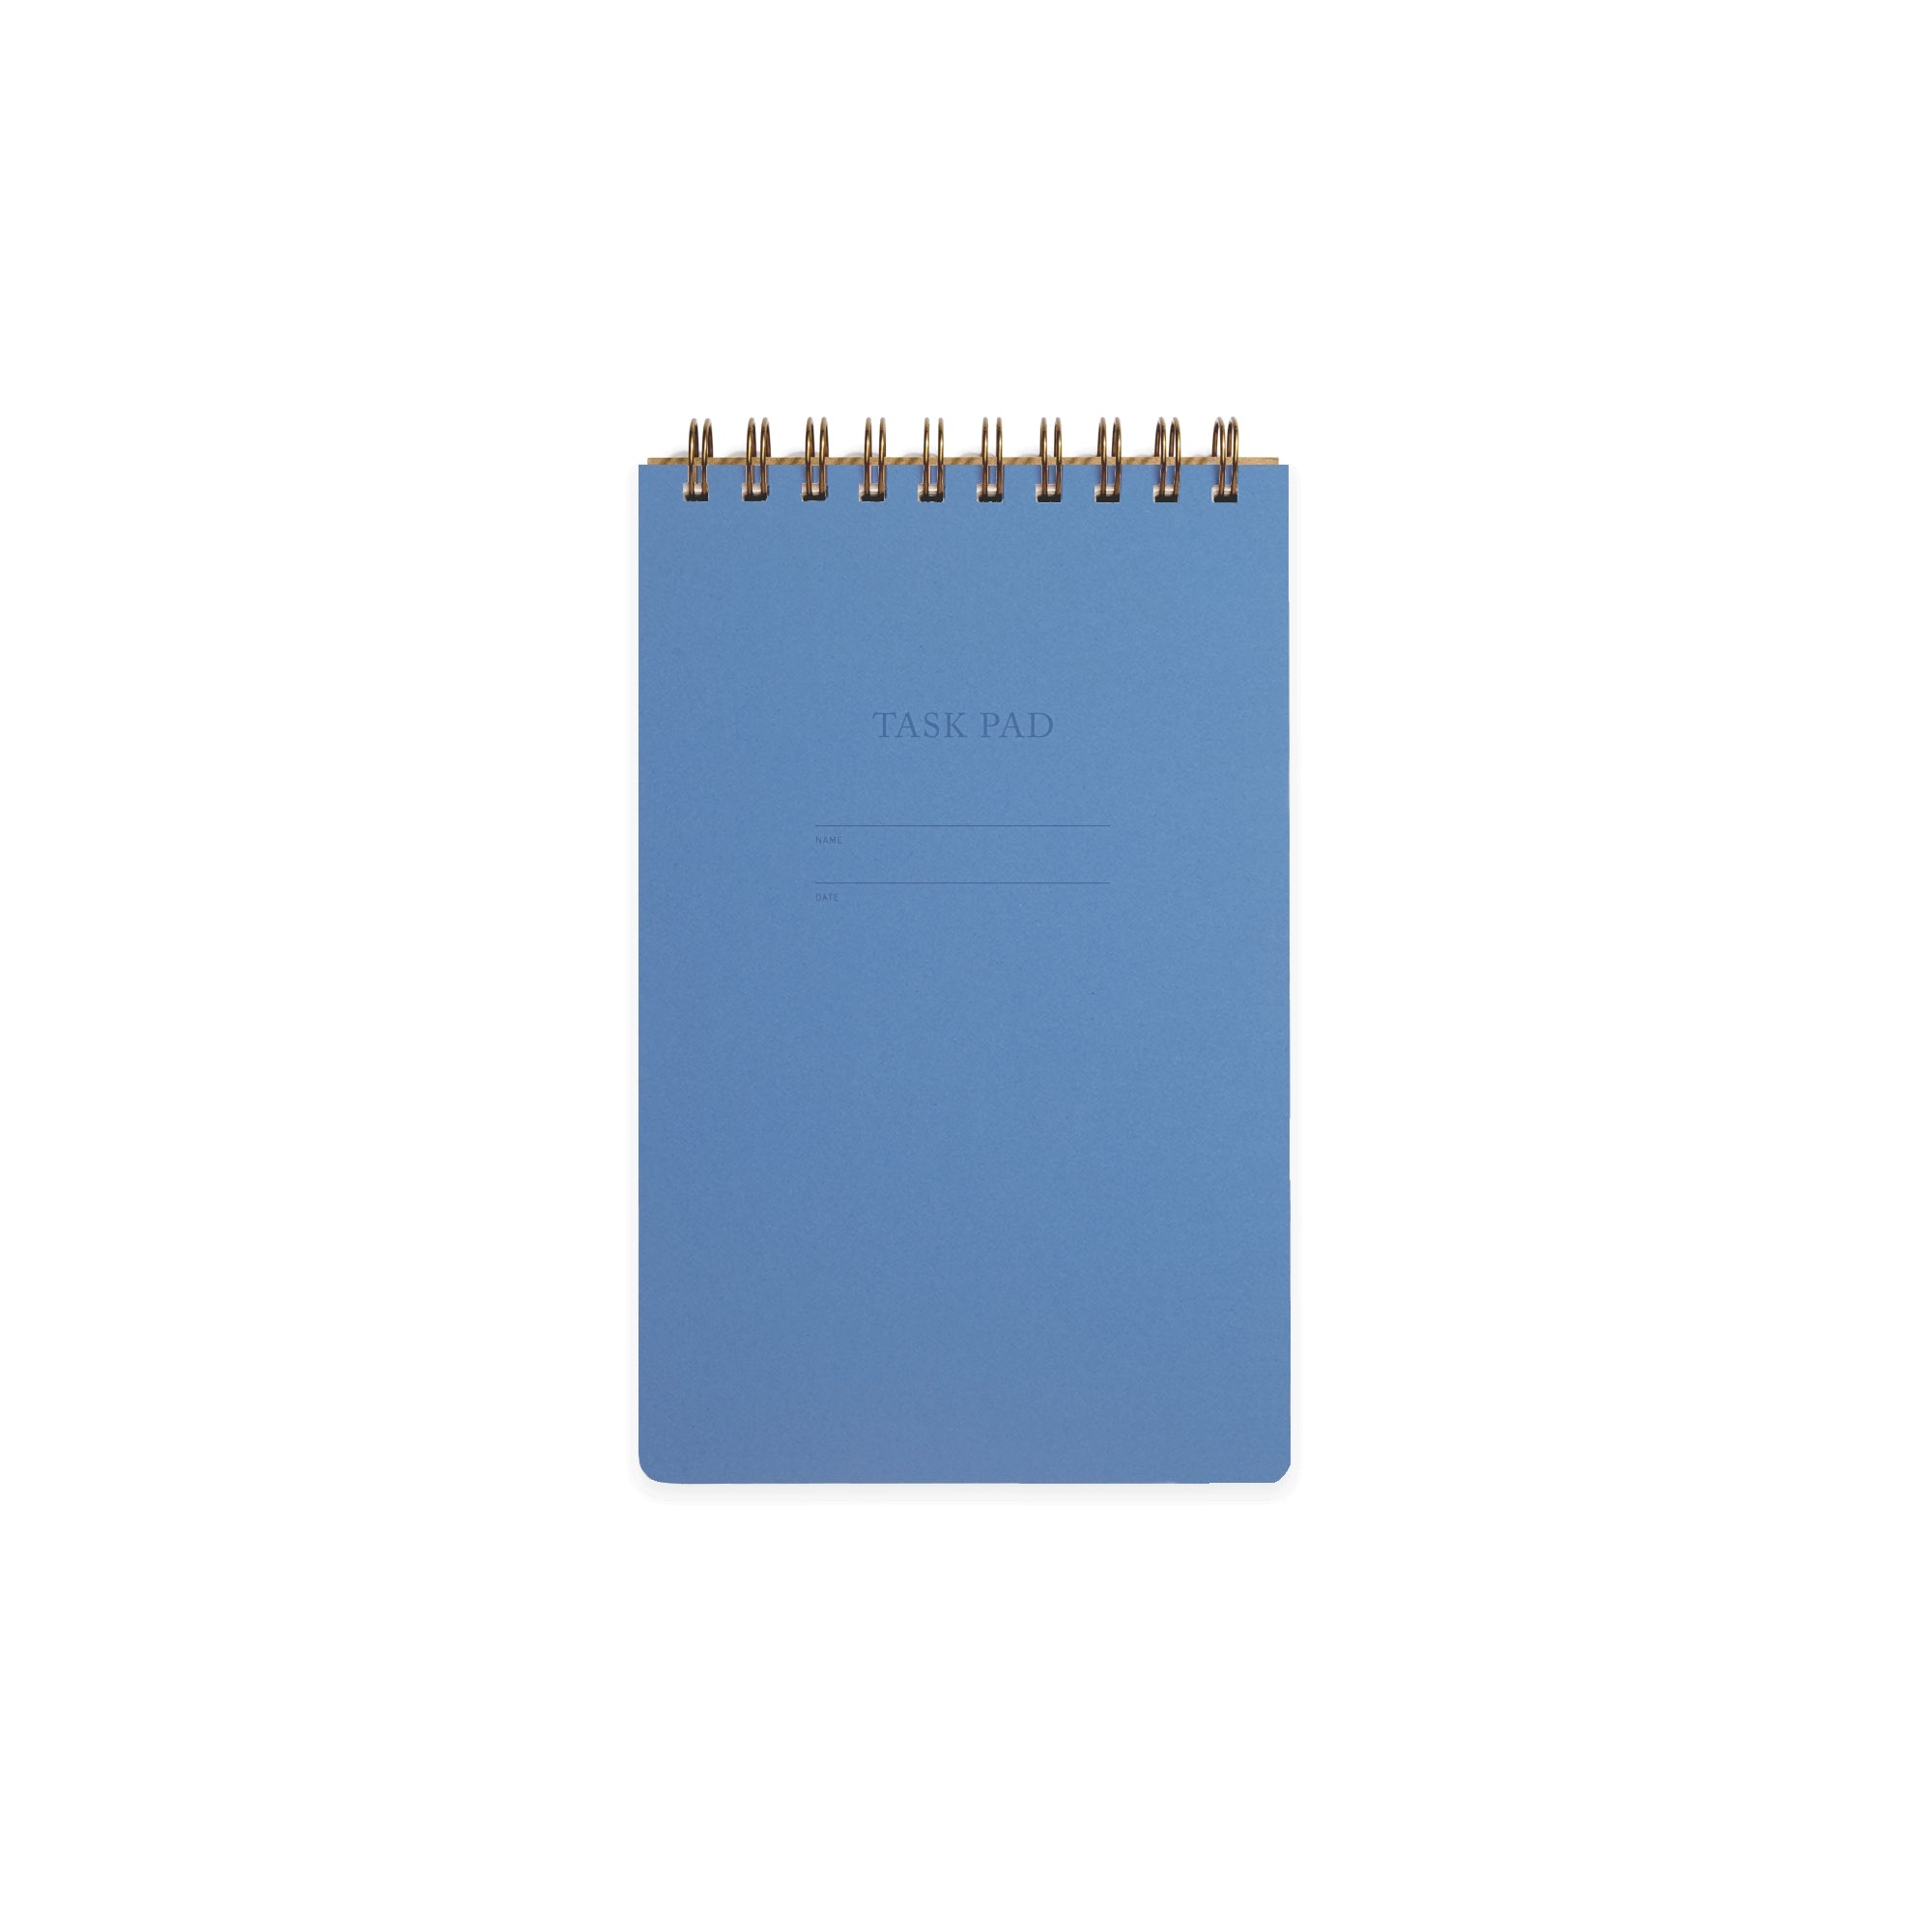 Image of ocean blue cover with letter pressed text says, “Task pad”. “Name” and “Date” with lines for writing. Coiled binding on top.